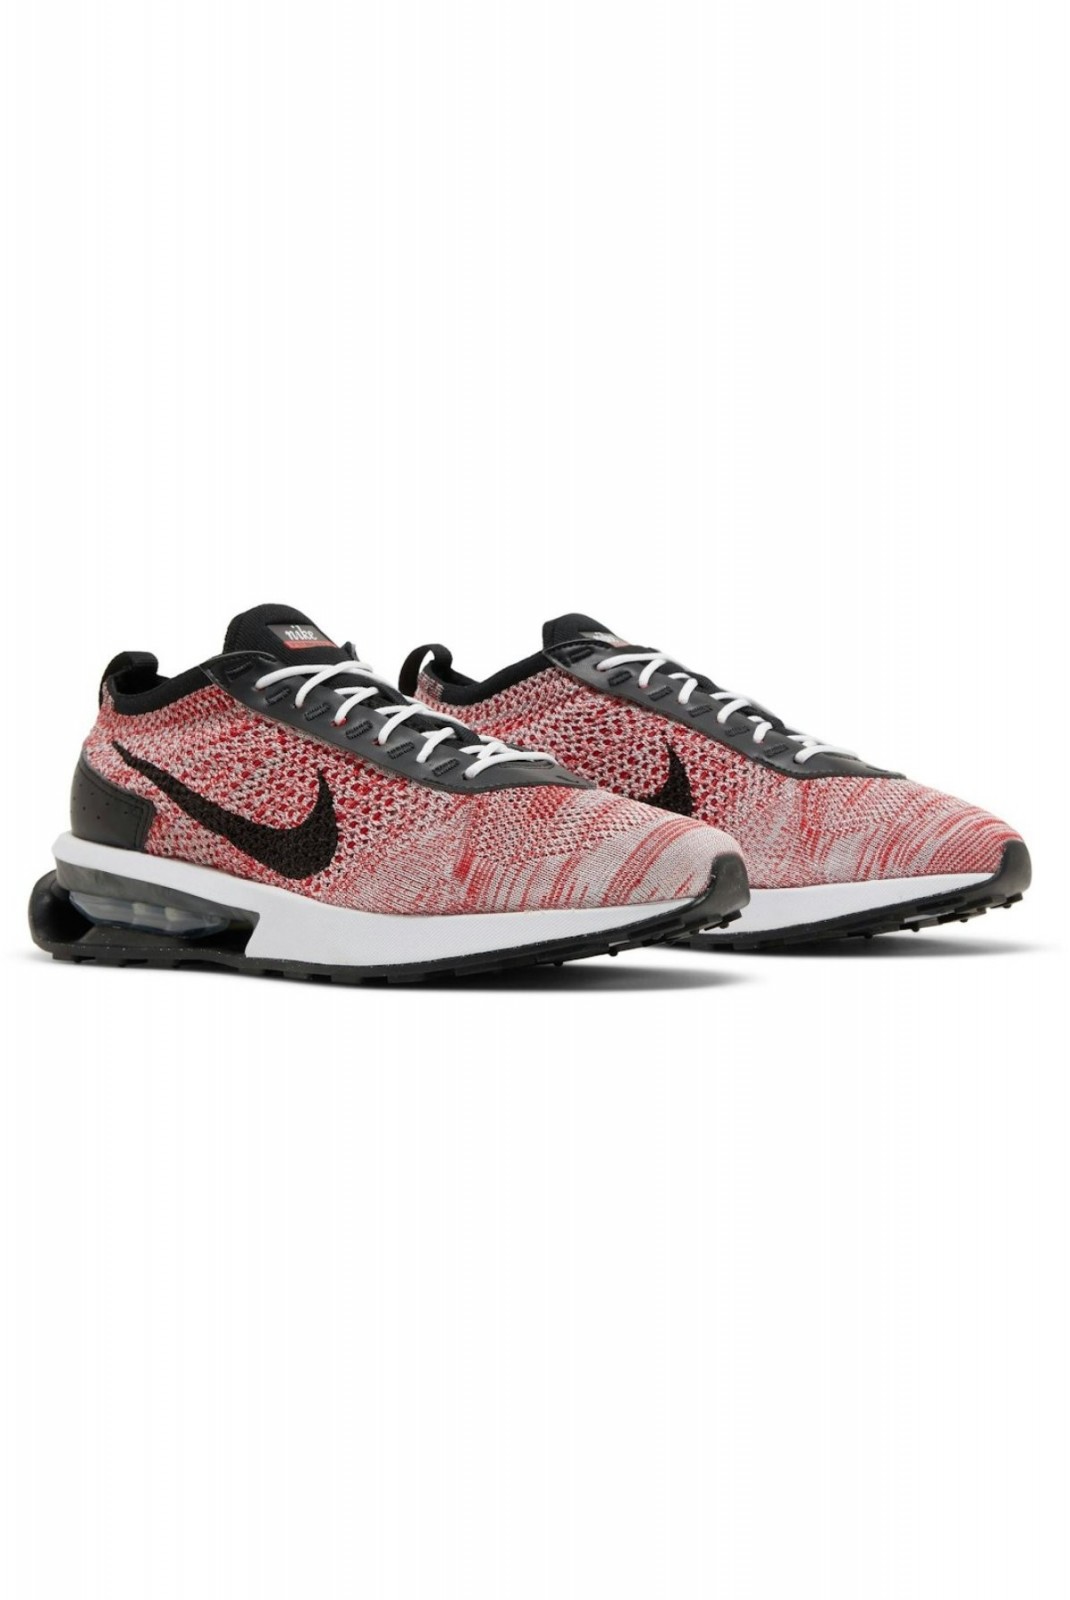 AIR MAX FLYKNIT RACER Nike 600 PINK FD2764